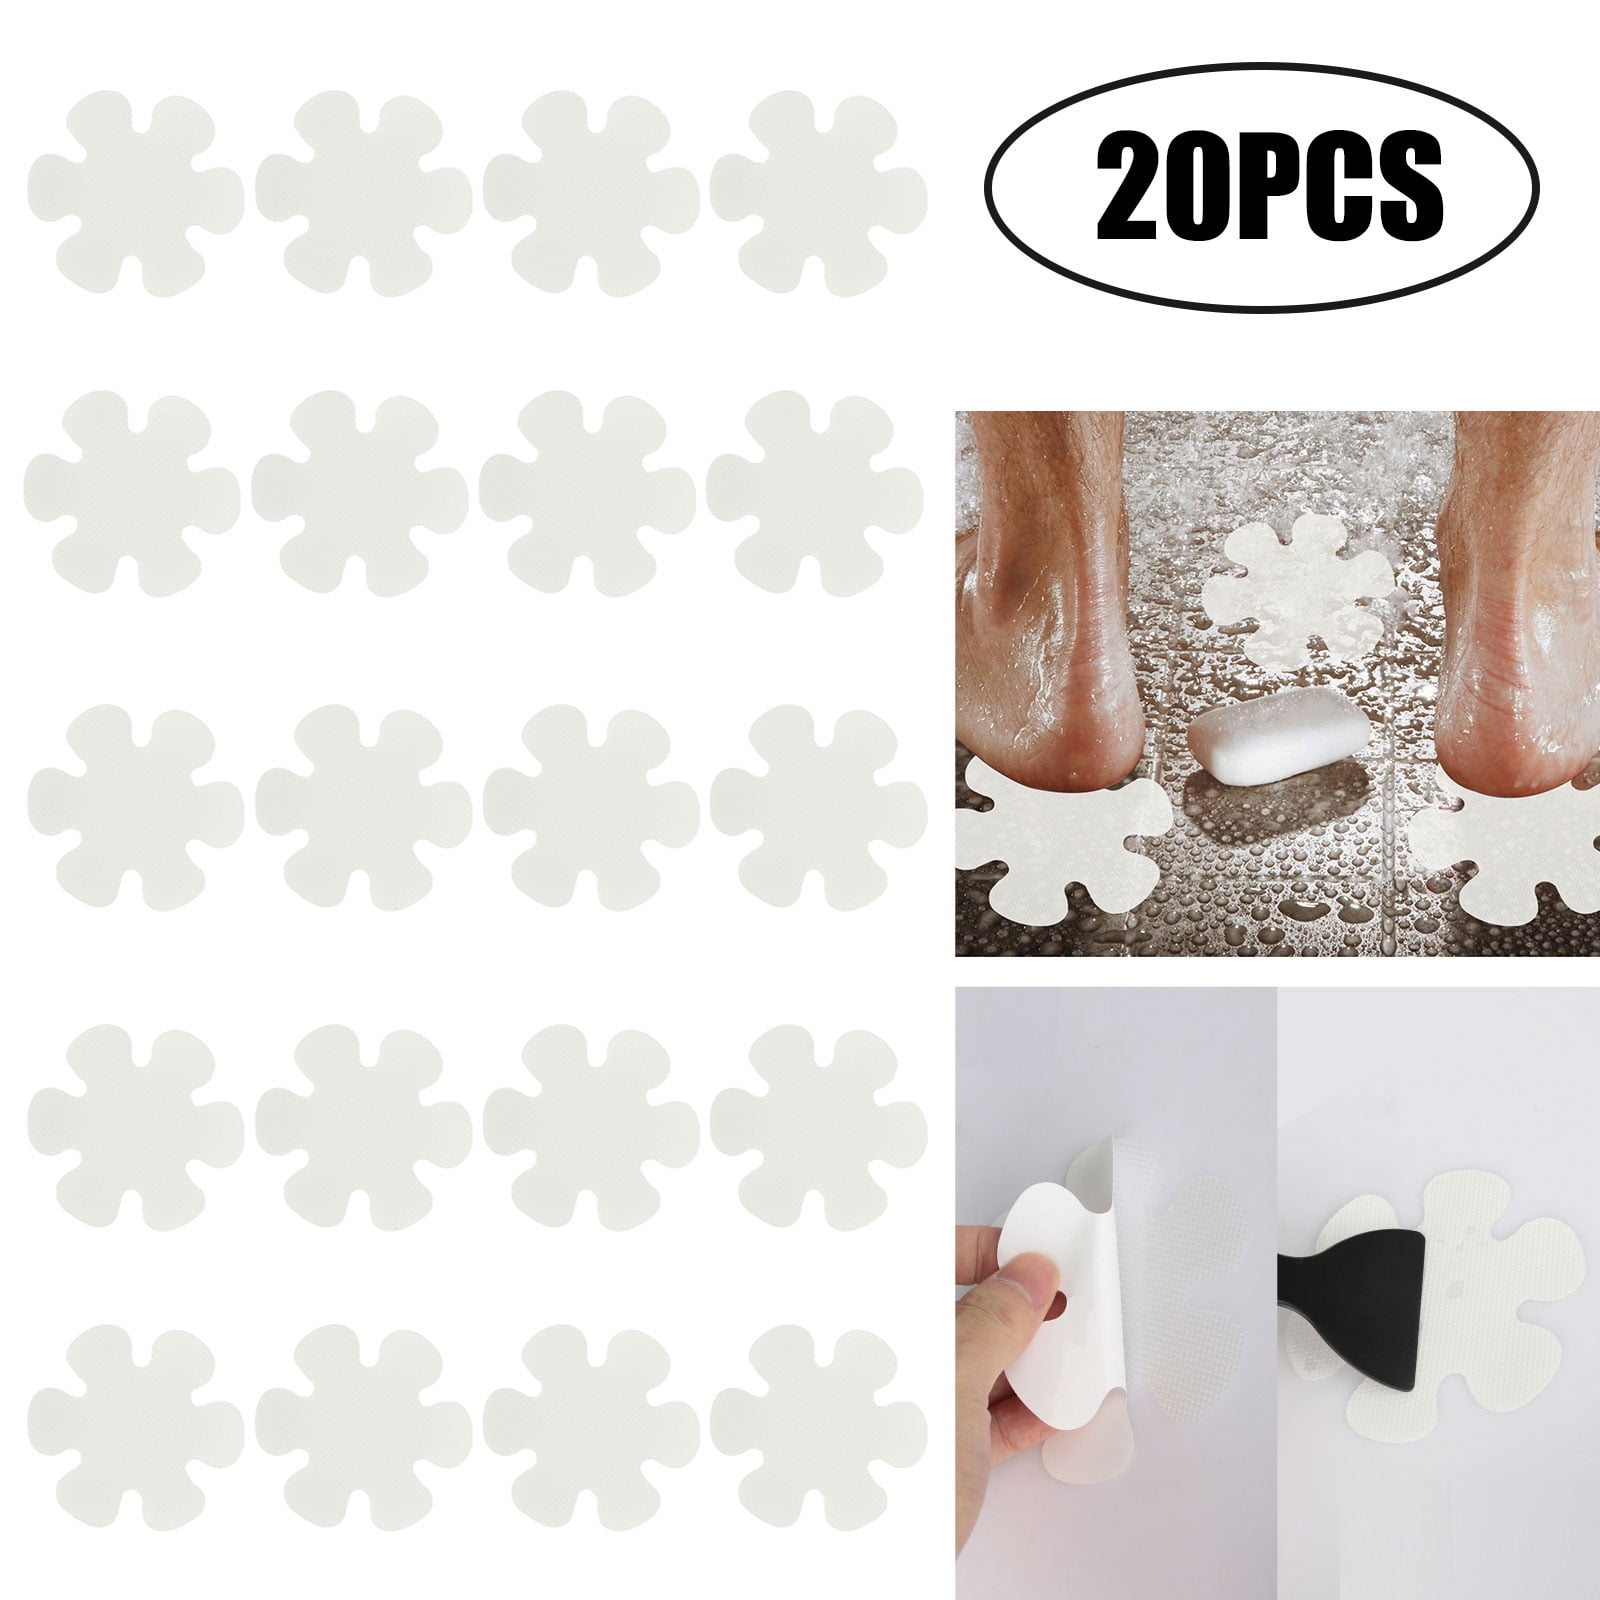 Details about   Non-Slip Bathtub Stickers Bathroom Tubs Showers Treads Adhesive Decals 20 PCS 